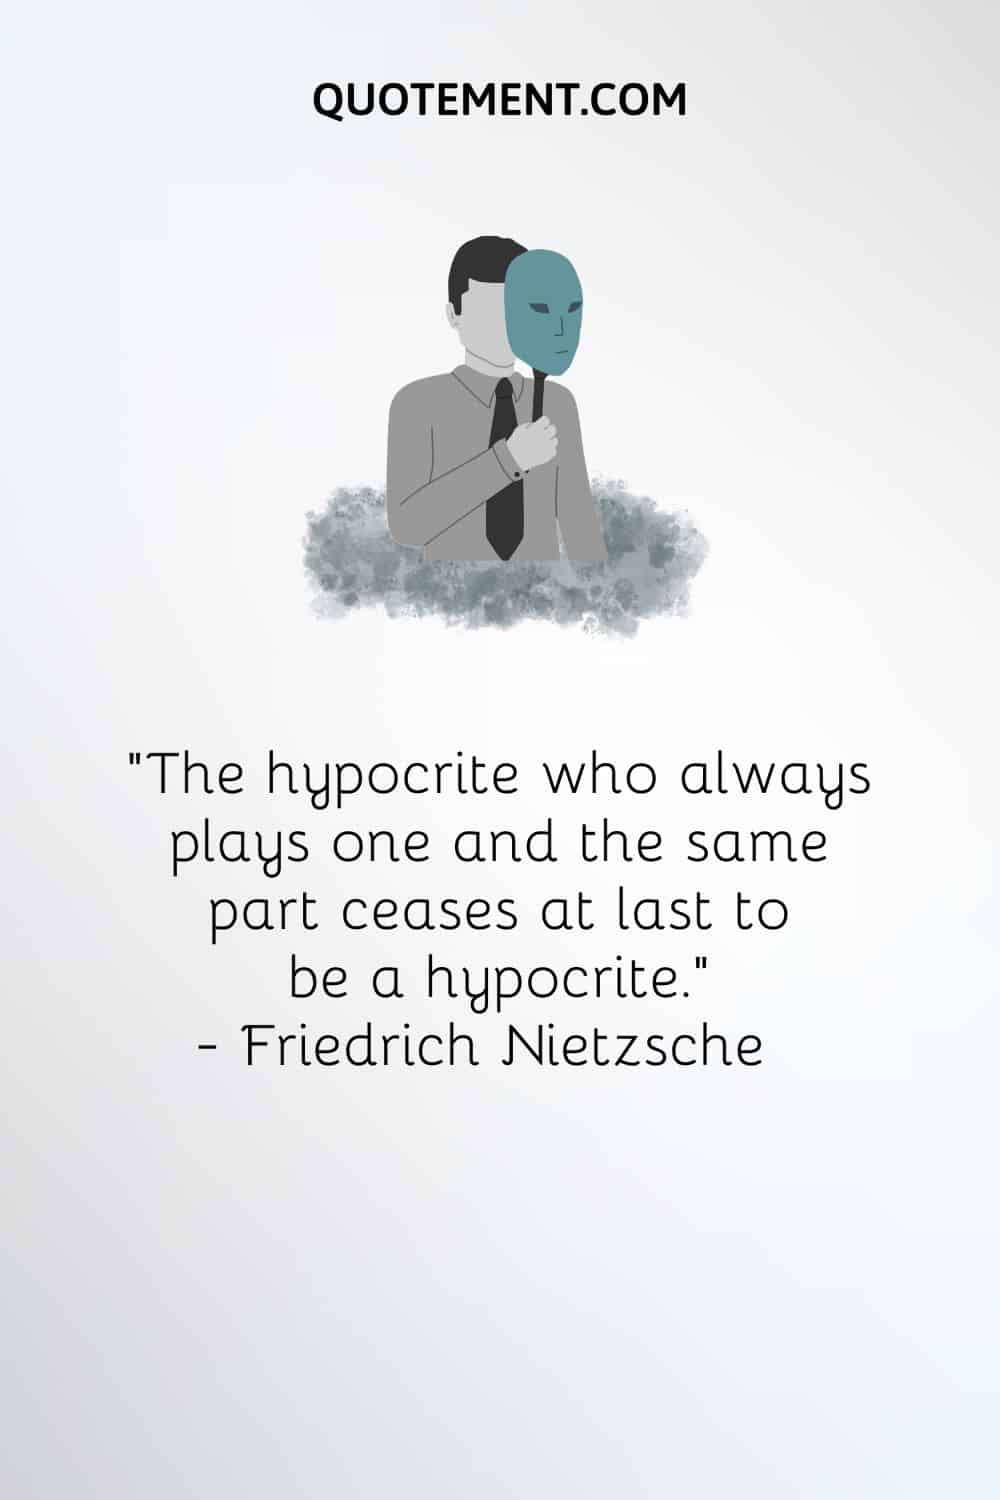 “The hypocrite who always plays one and the same part ceases at last to be a hypocrite.” — Friedrich Nietzsche
